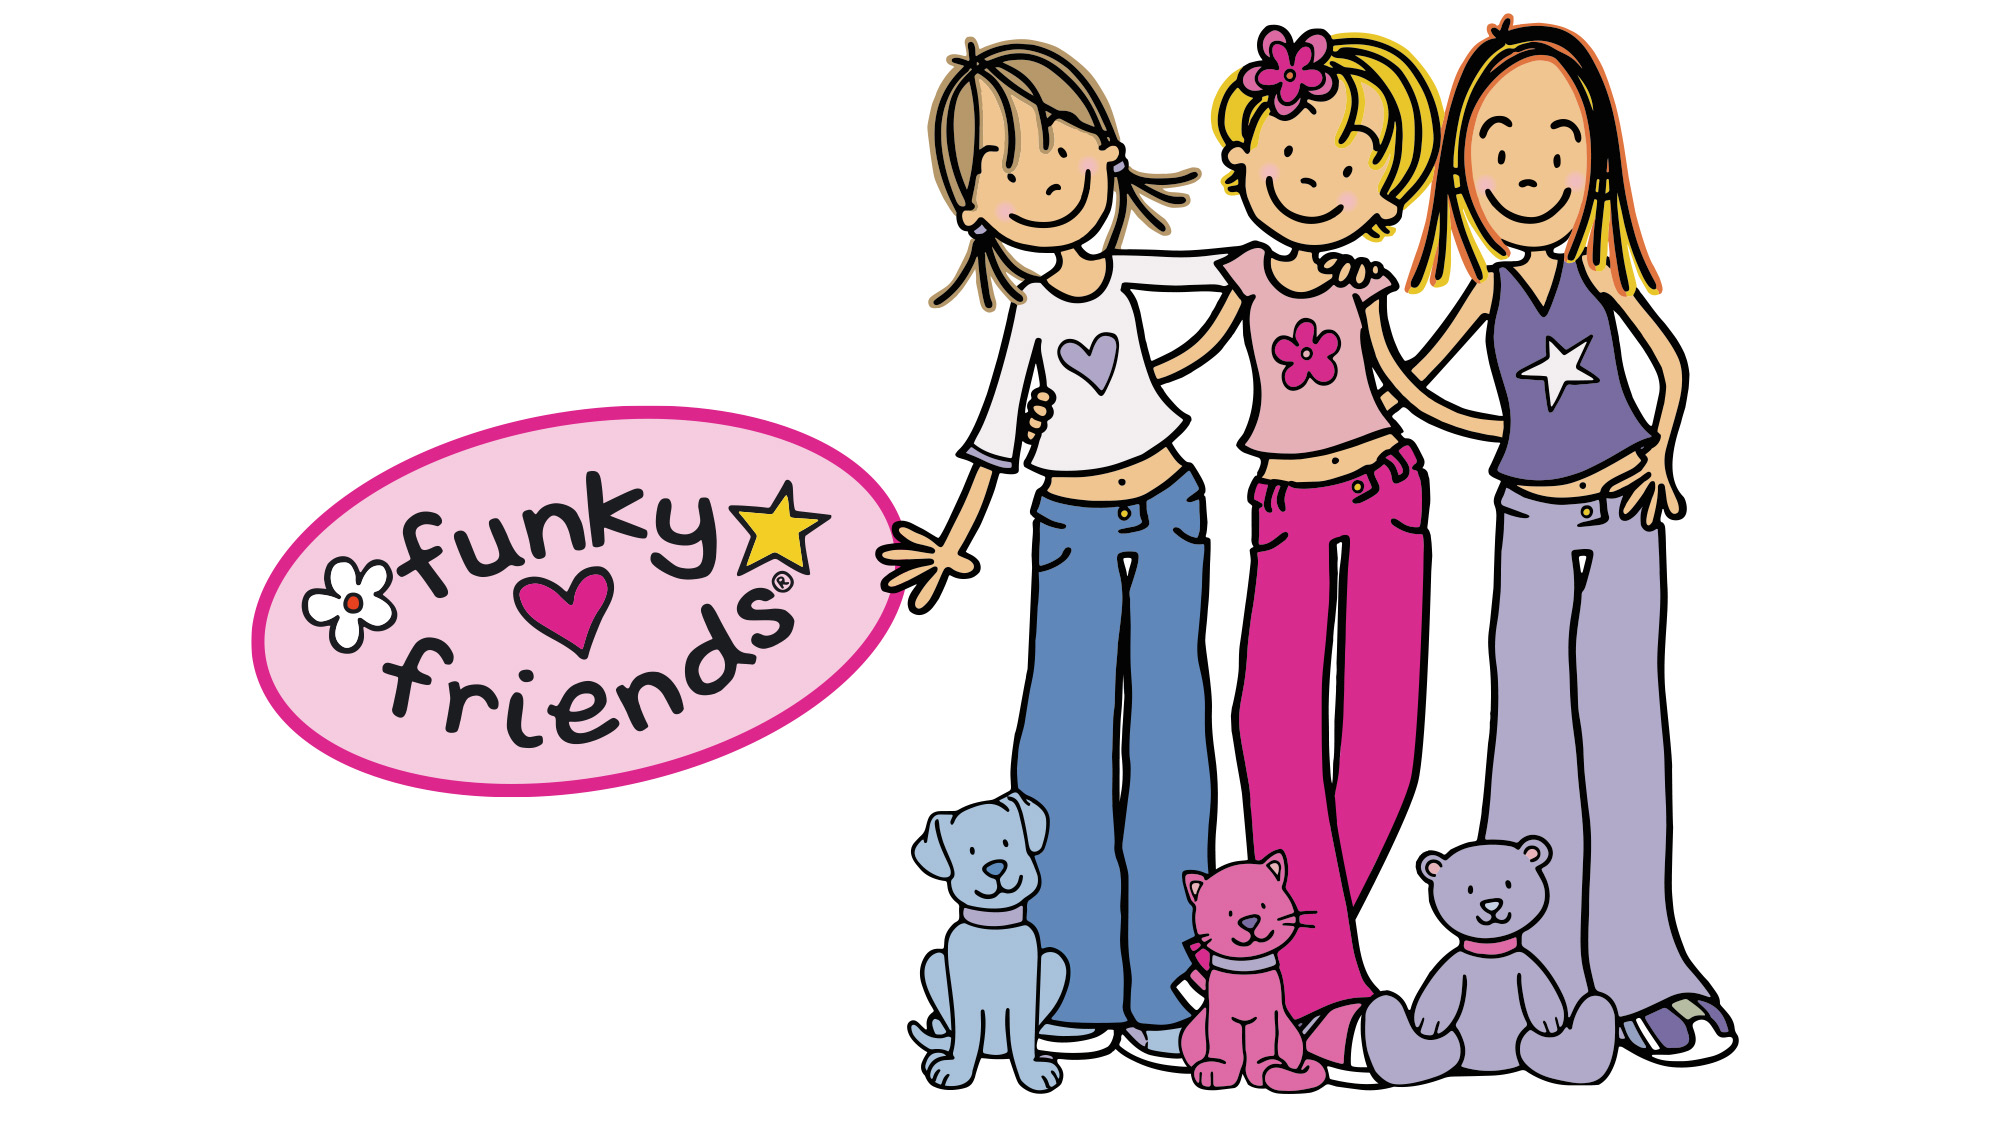 Launched in 1996 the original Funky Friends is Back!